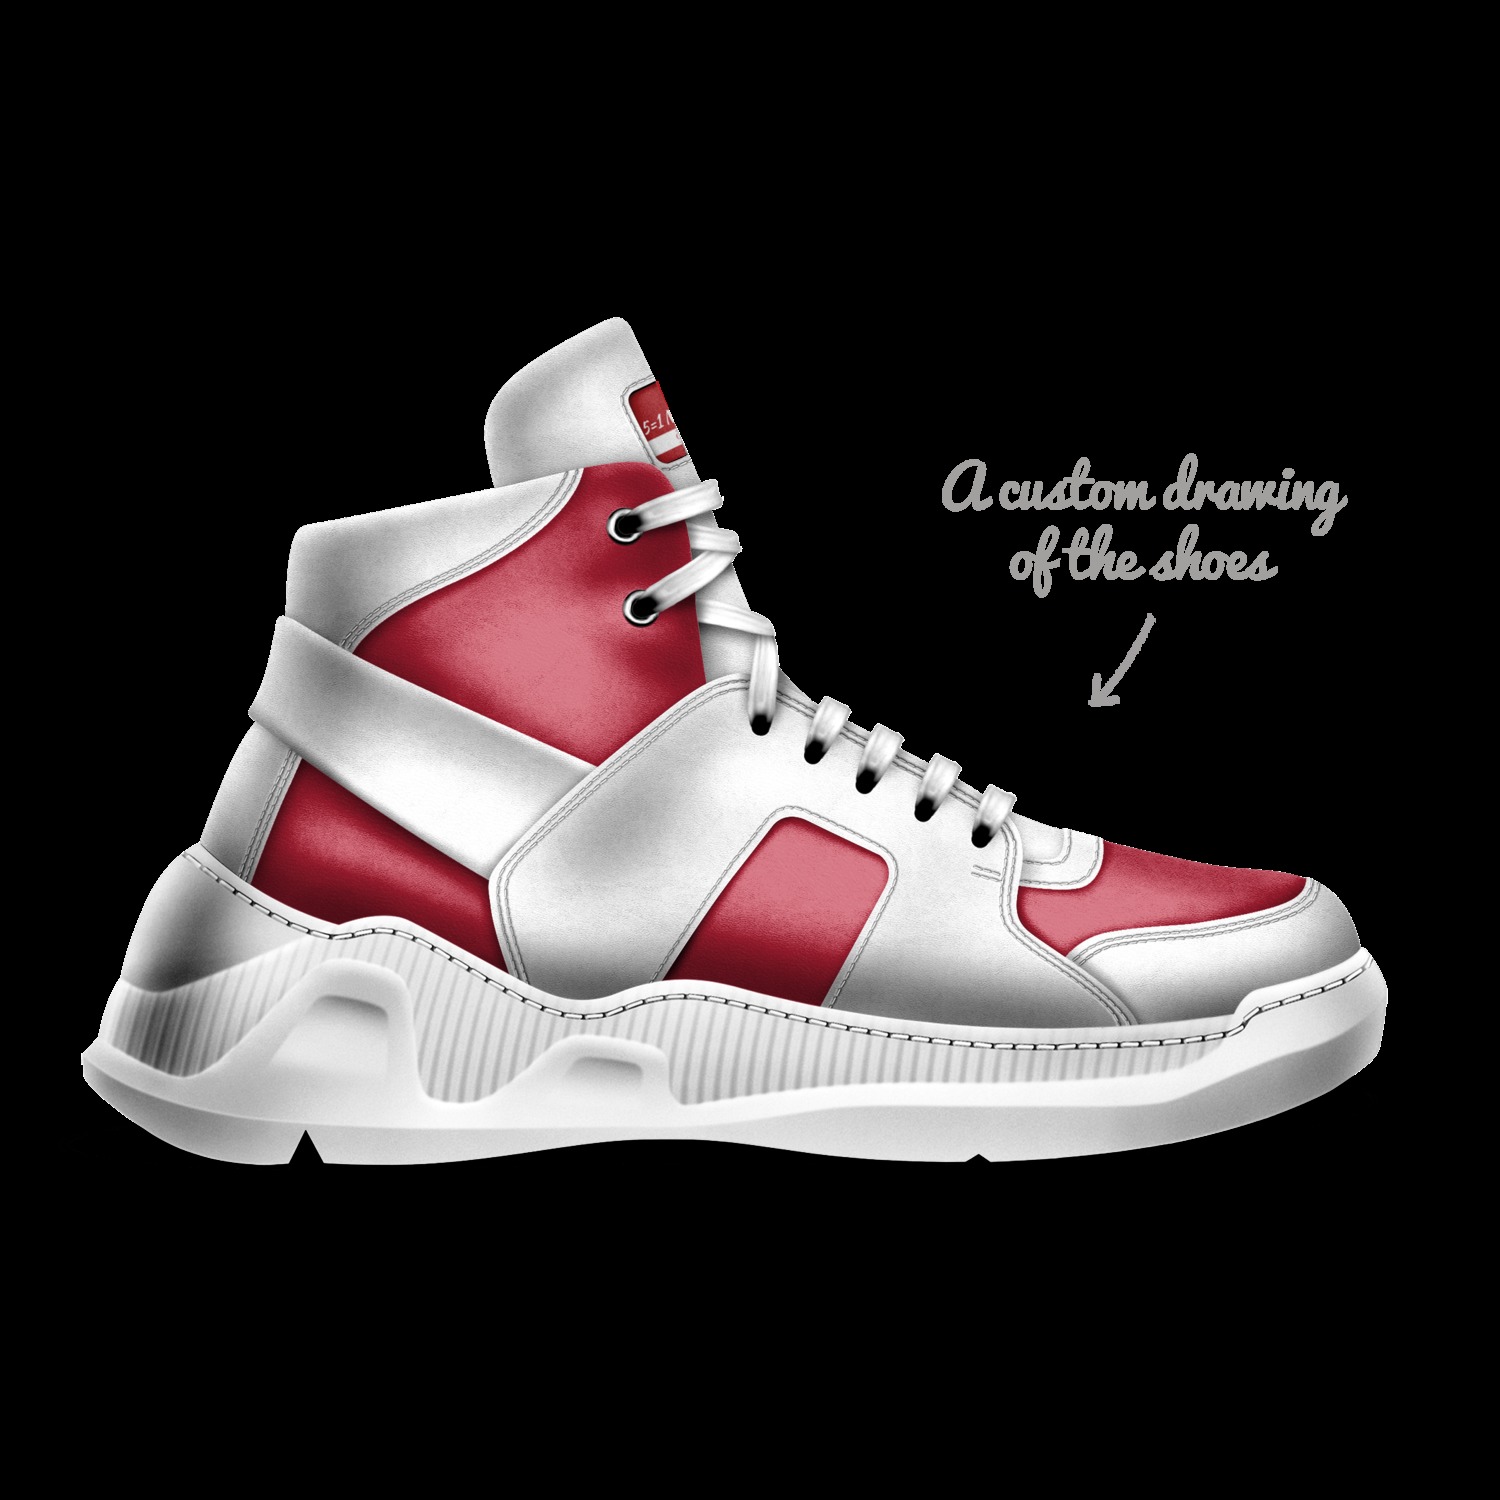 Shoe concept by Nba Global Wholesale